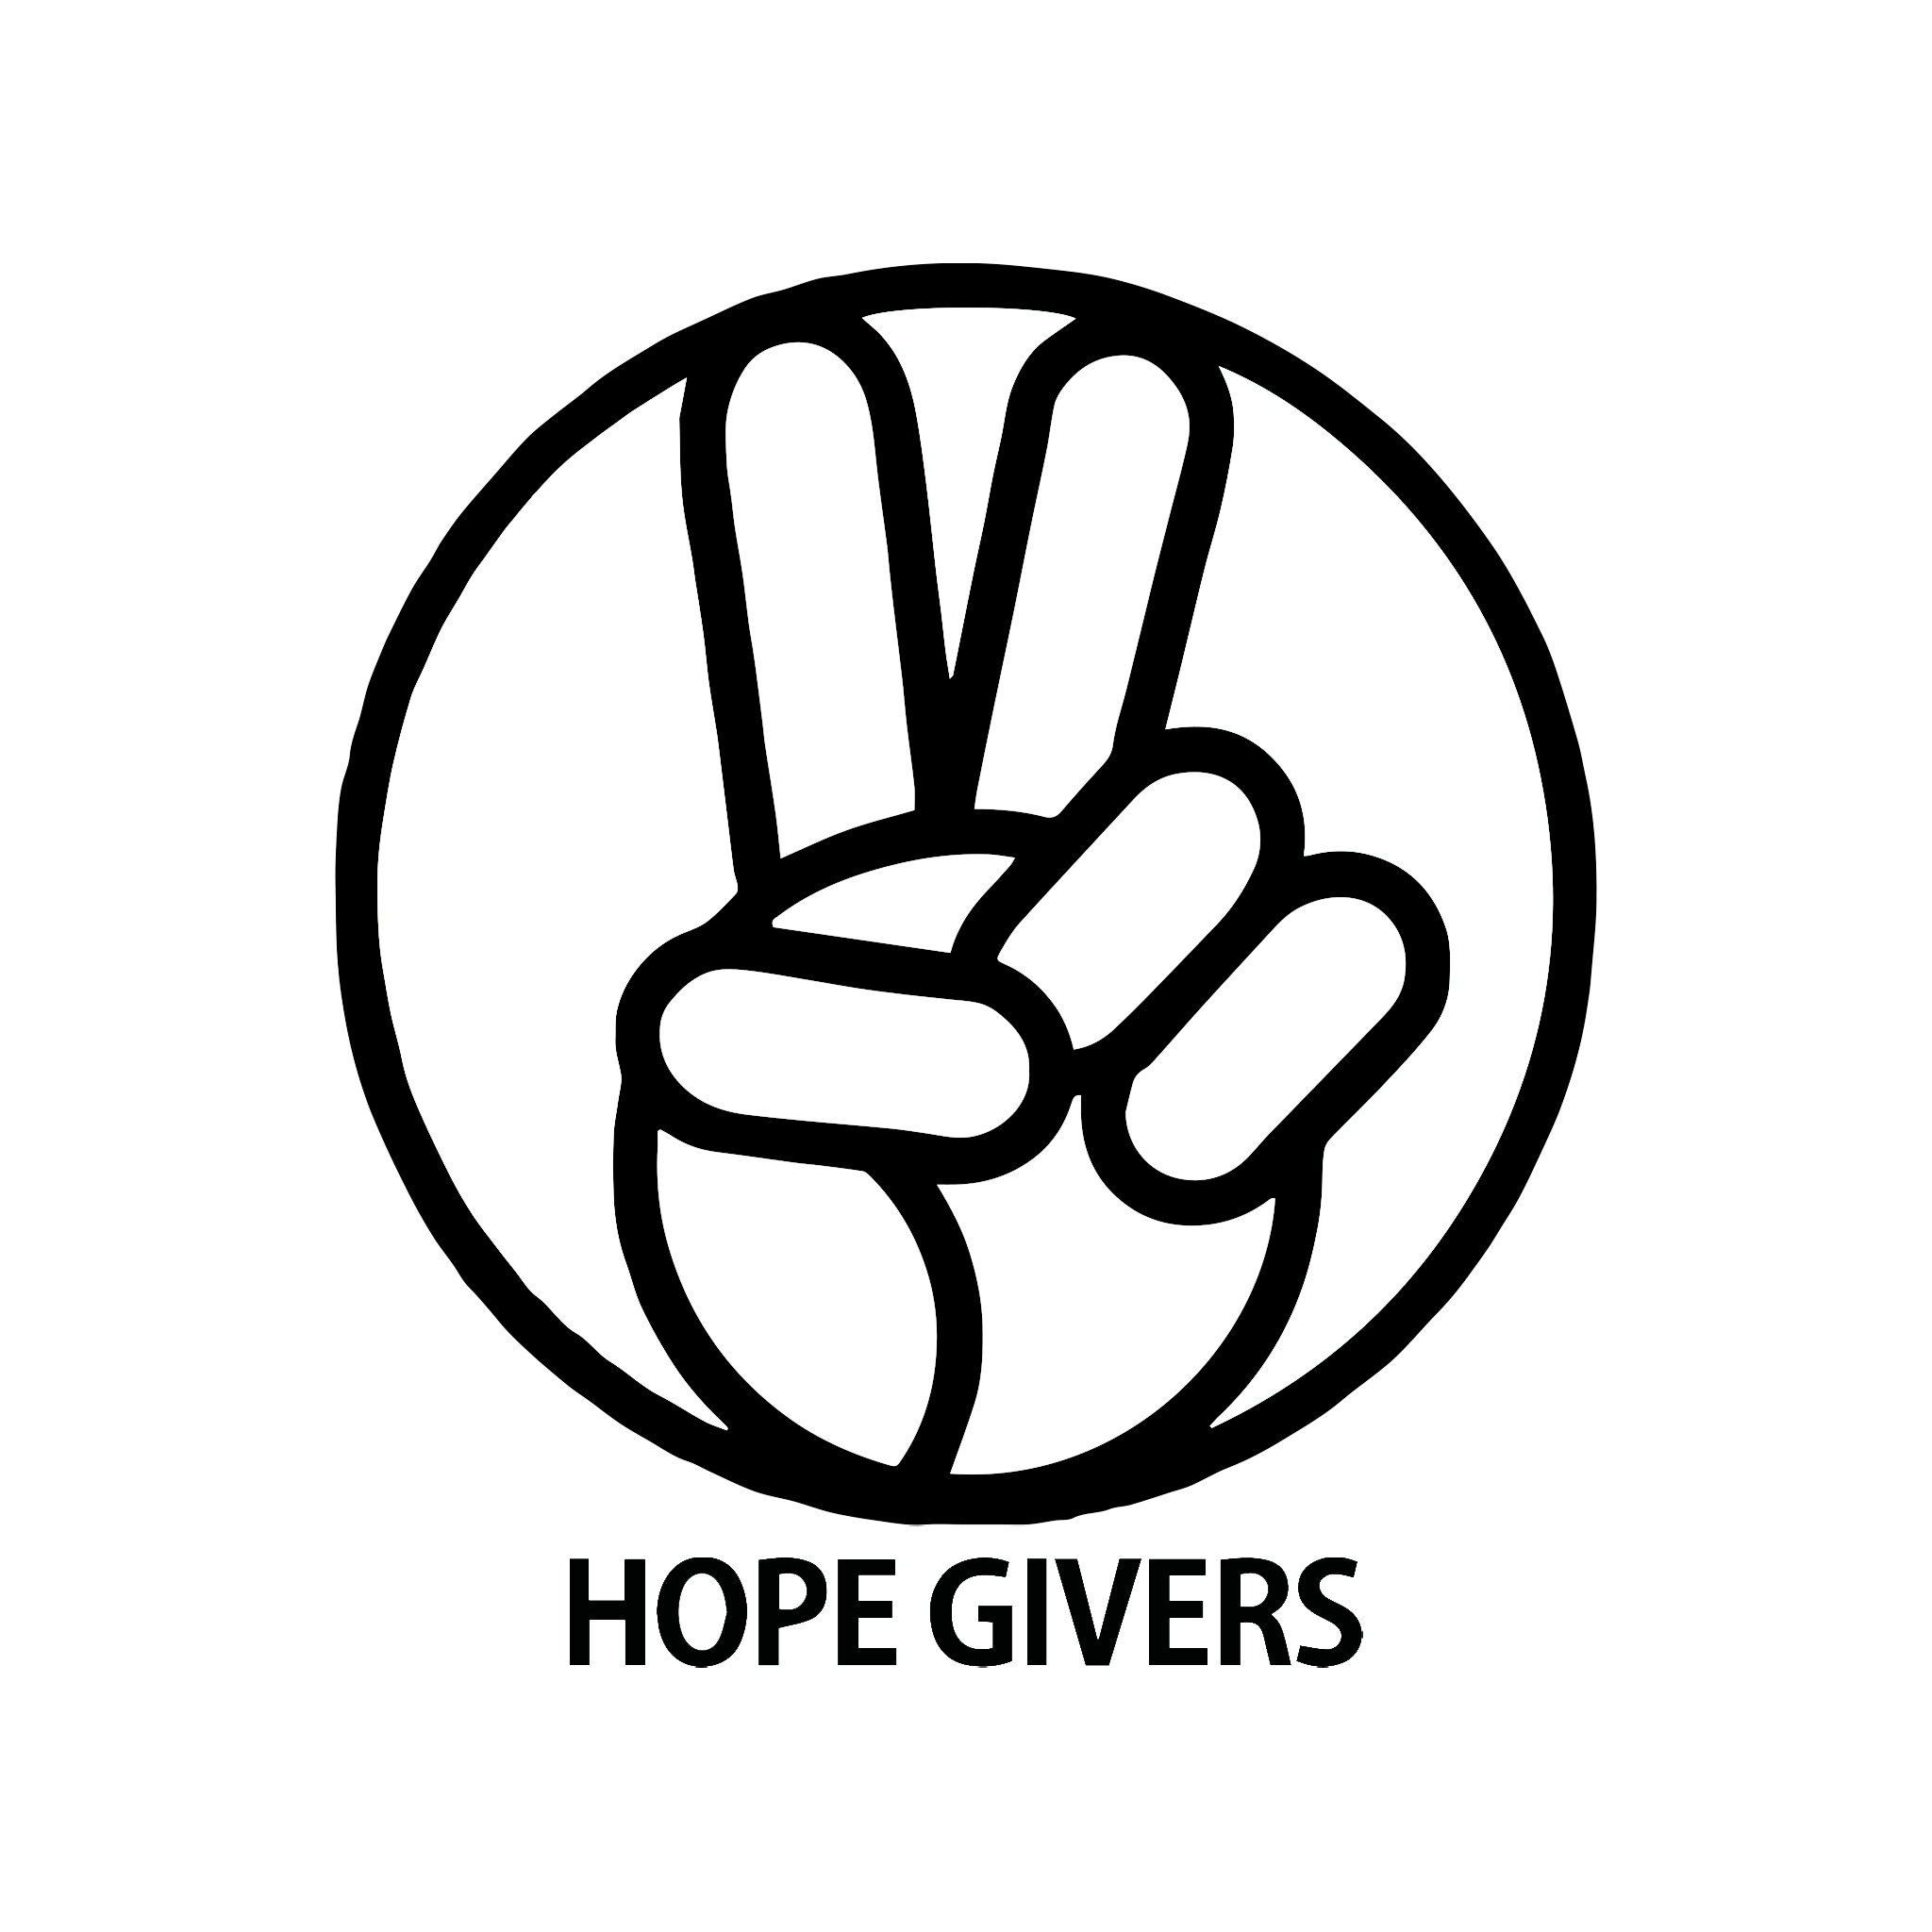 A circle surrounds a stylized hand exhibiting a peace sign. The hand also grasps a stylized Earth in its palm. Below is 'Hope Givers'